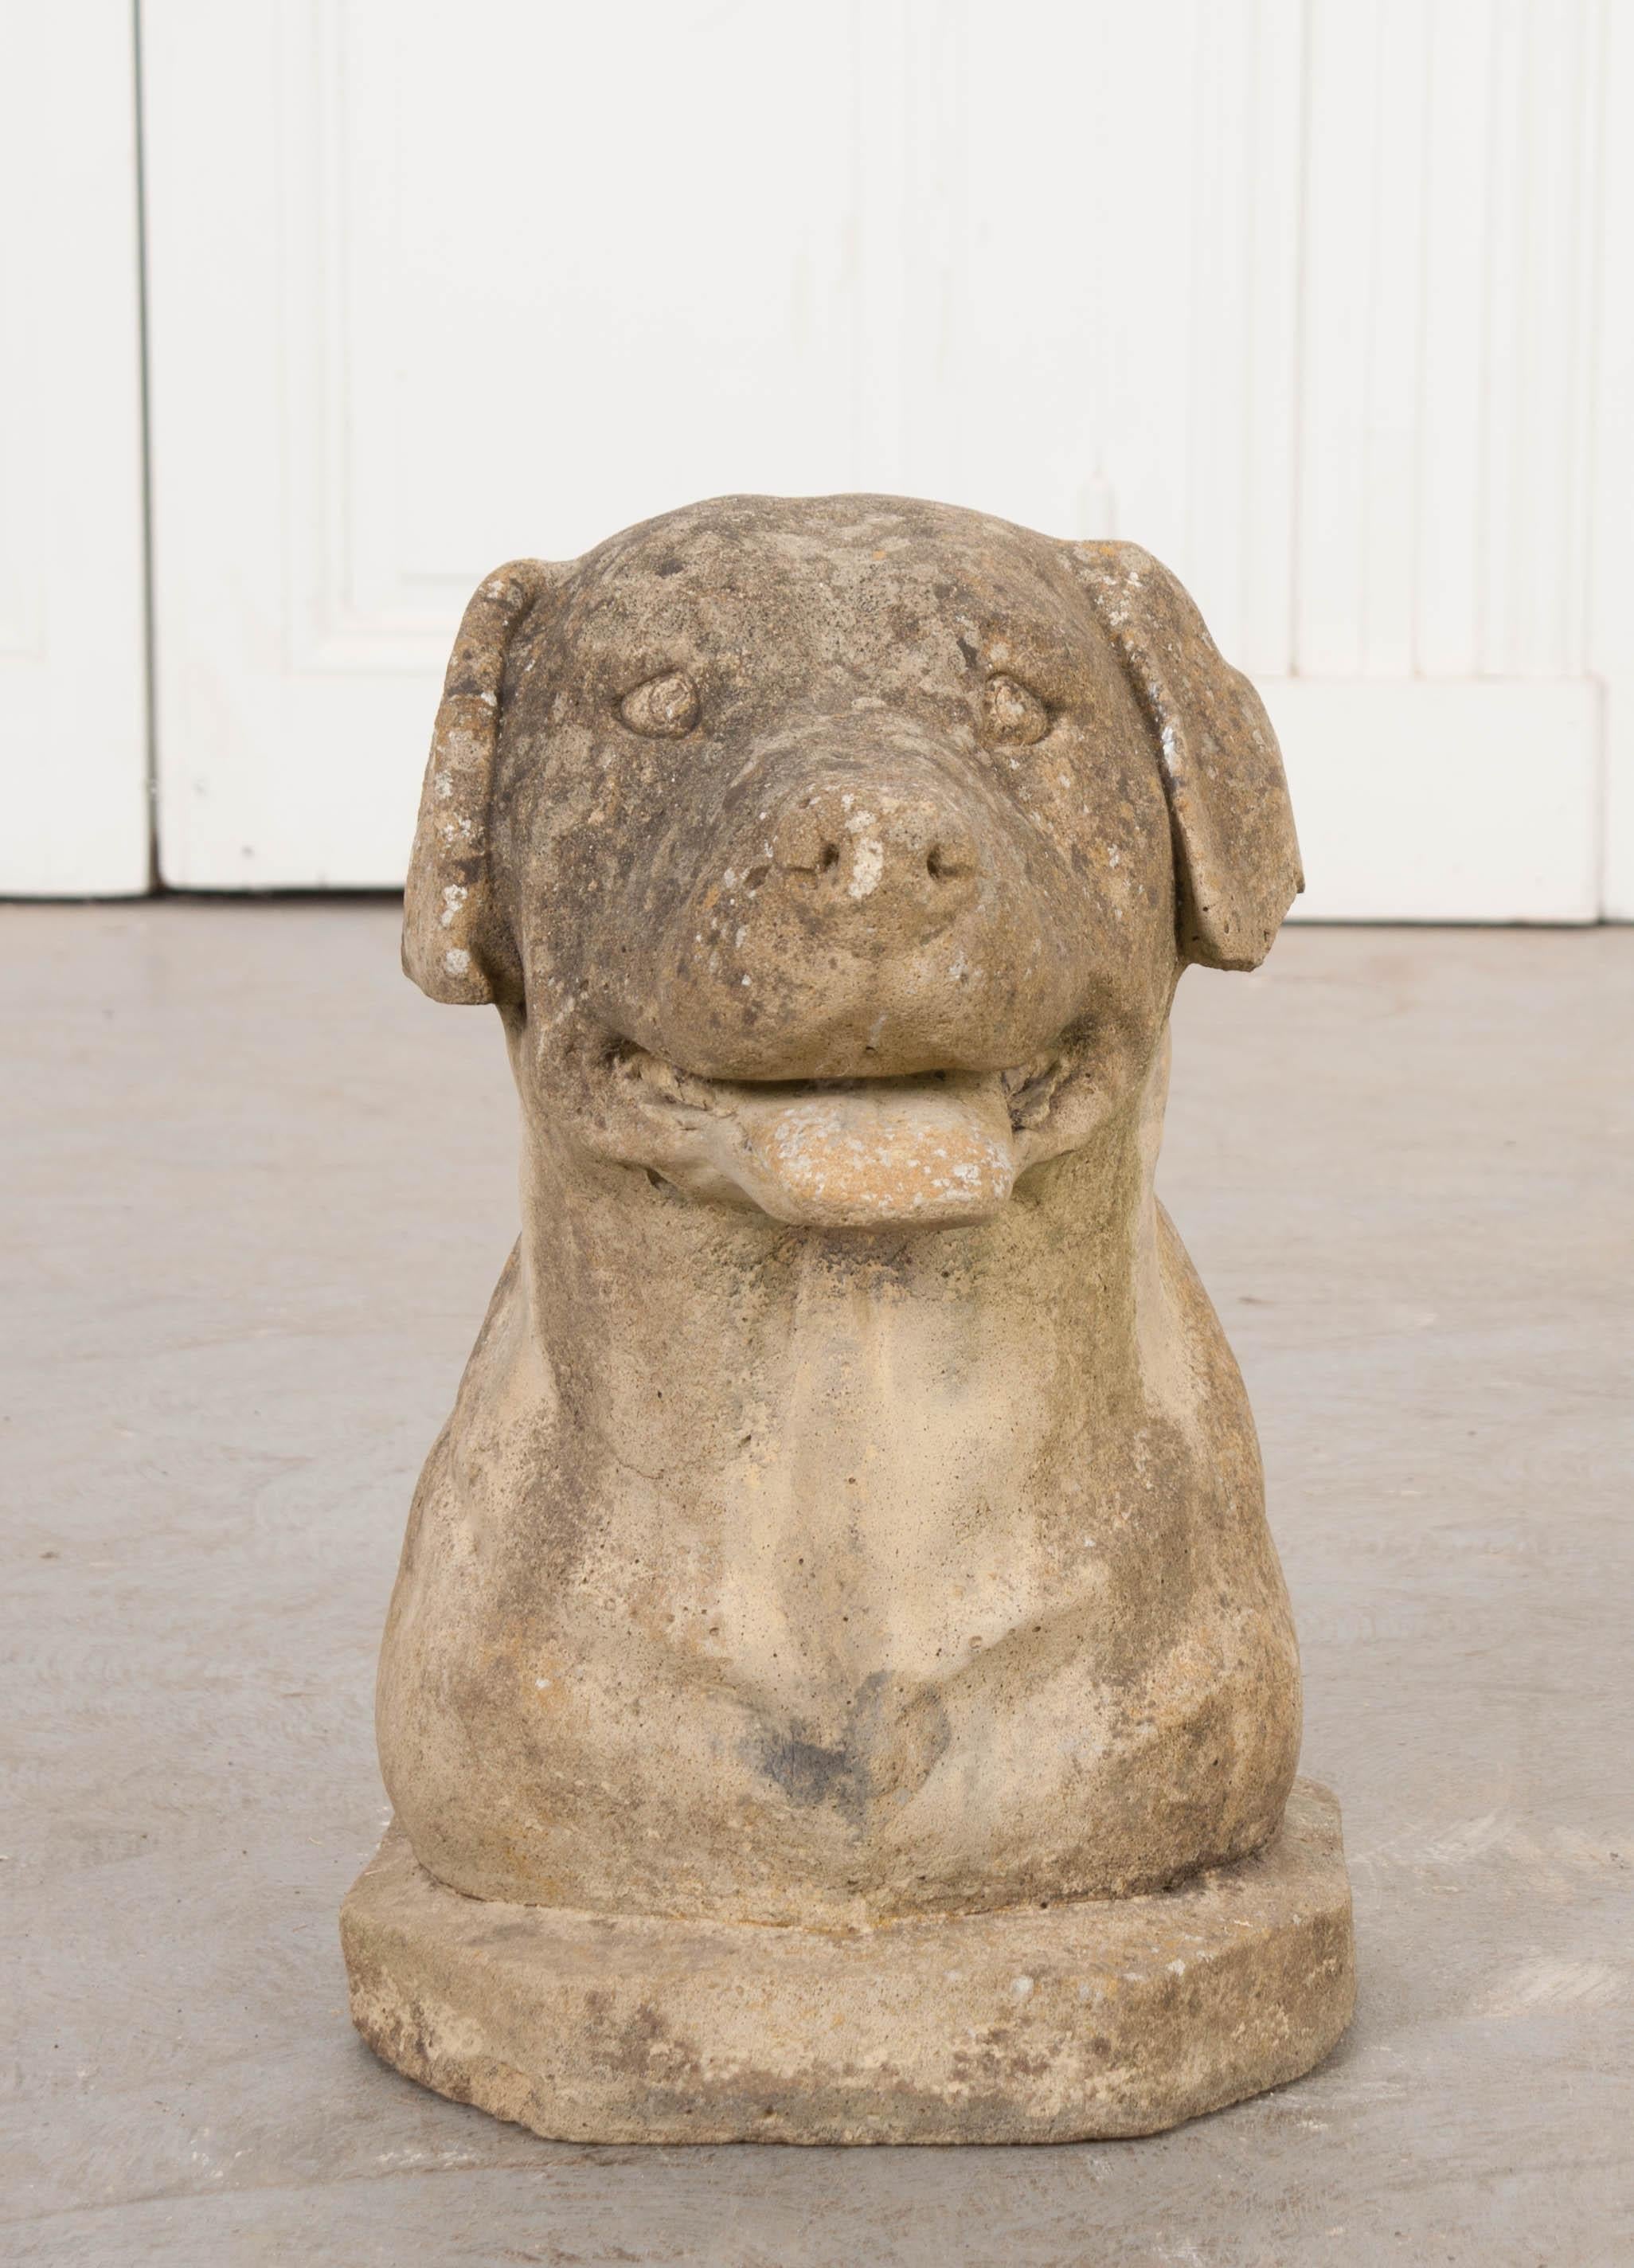 This delightful carved stone figural head of a retriever is from 1880s England. No matter if placed indoors or out, one look at this happy pup is sure to brighten anyone’s mood!